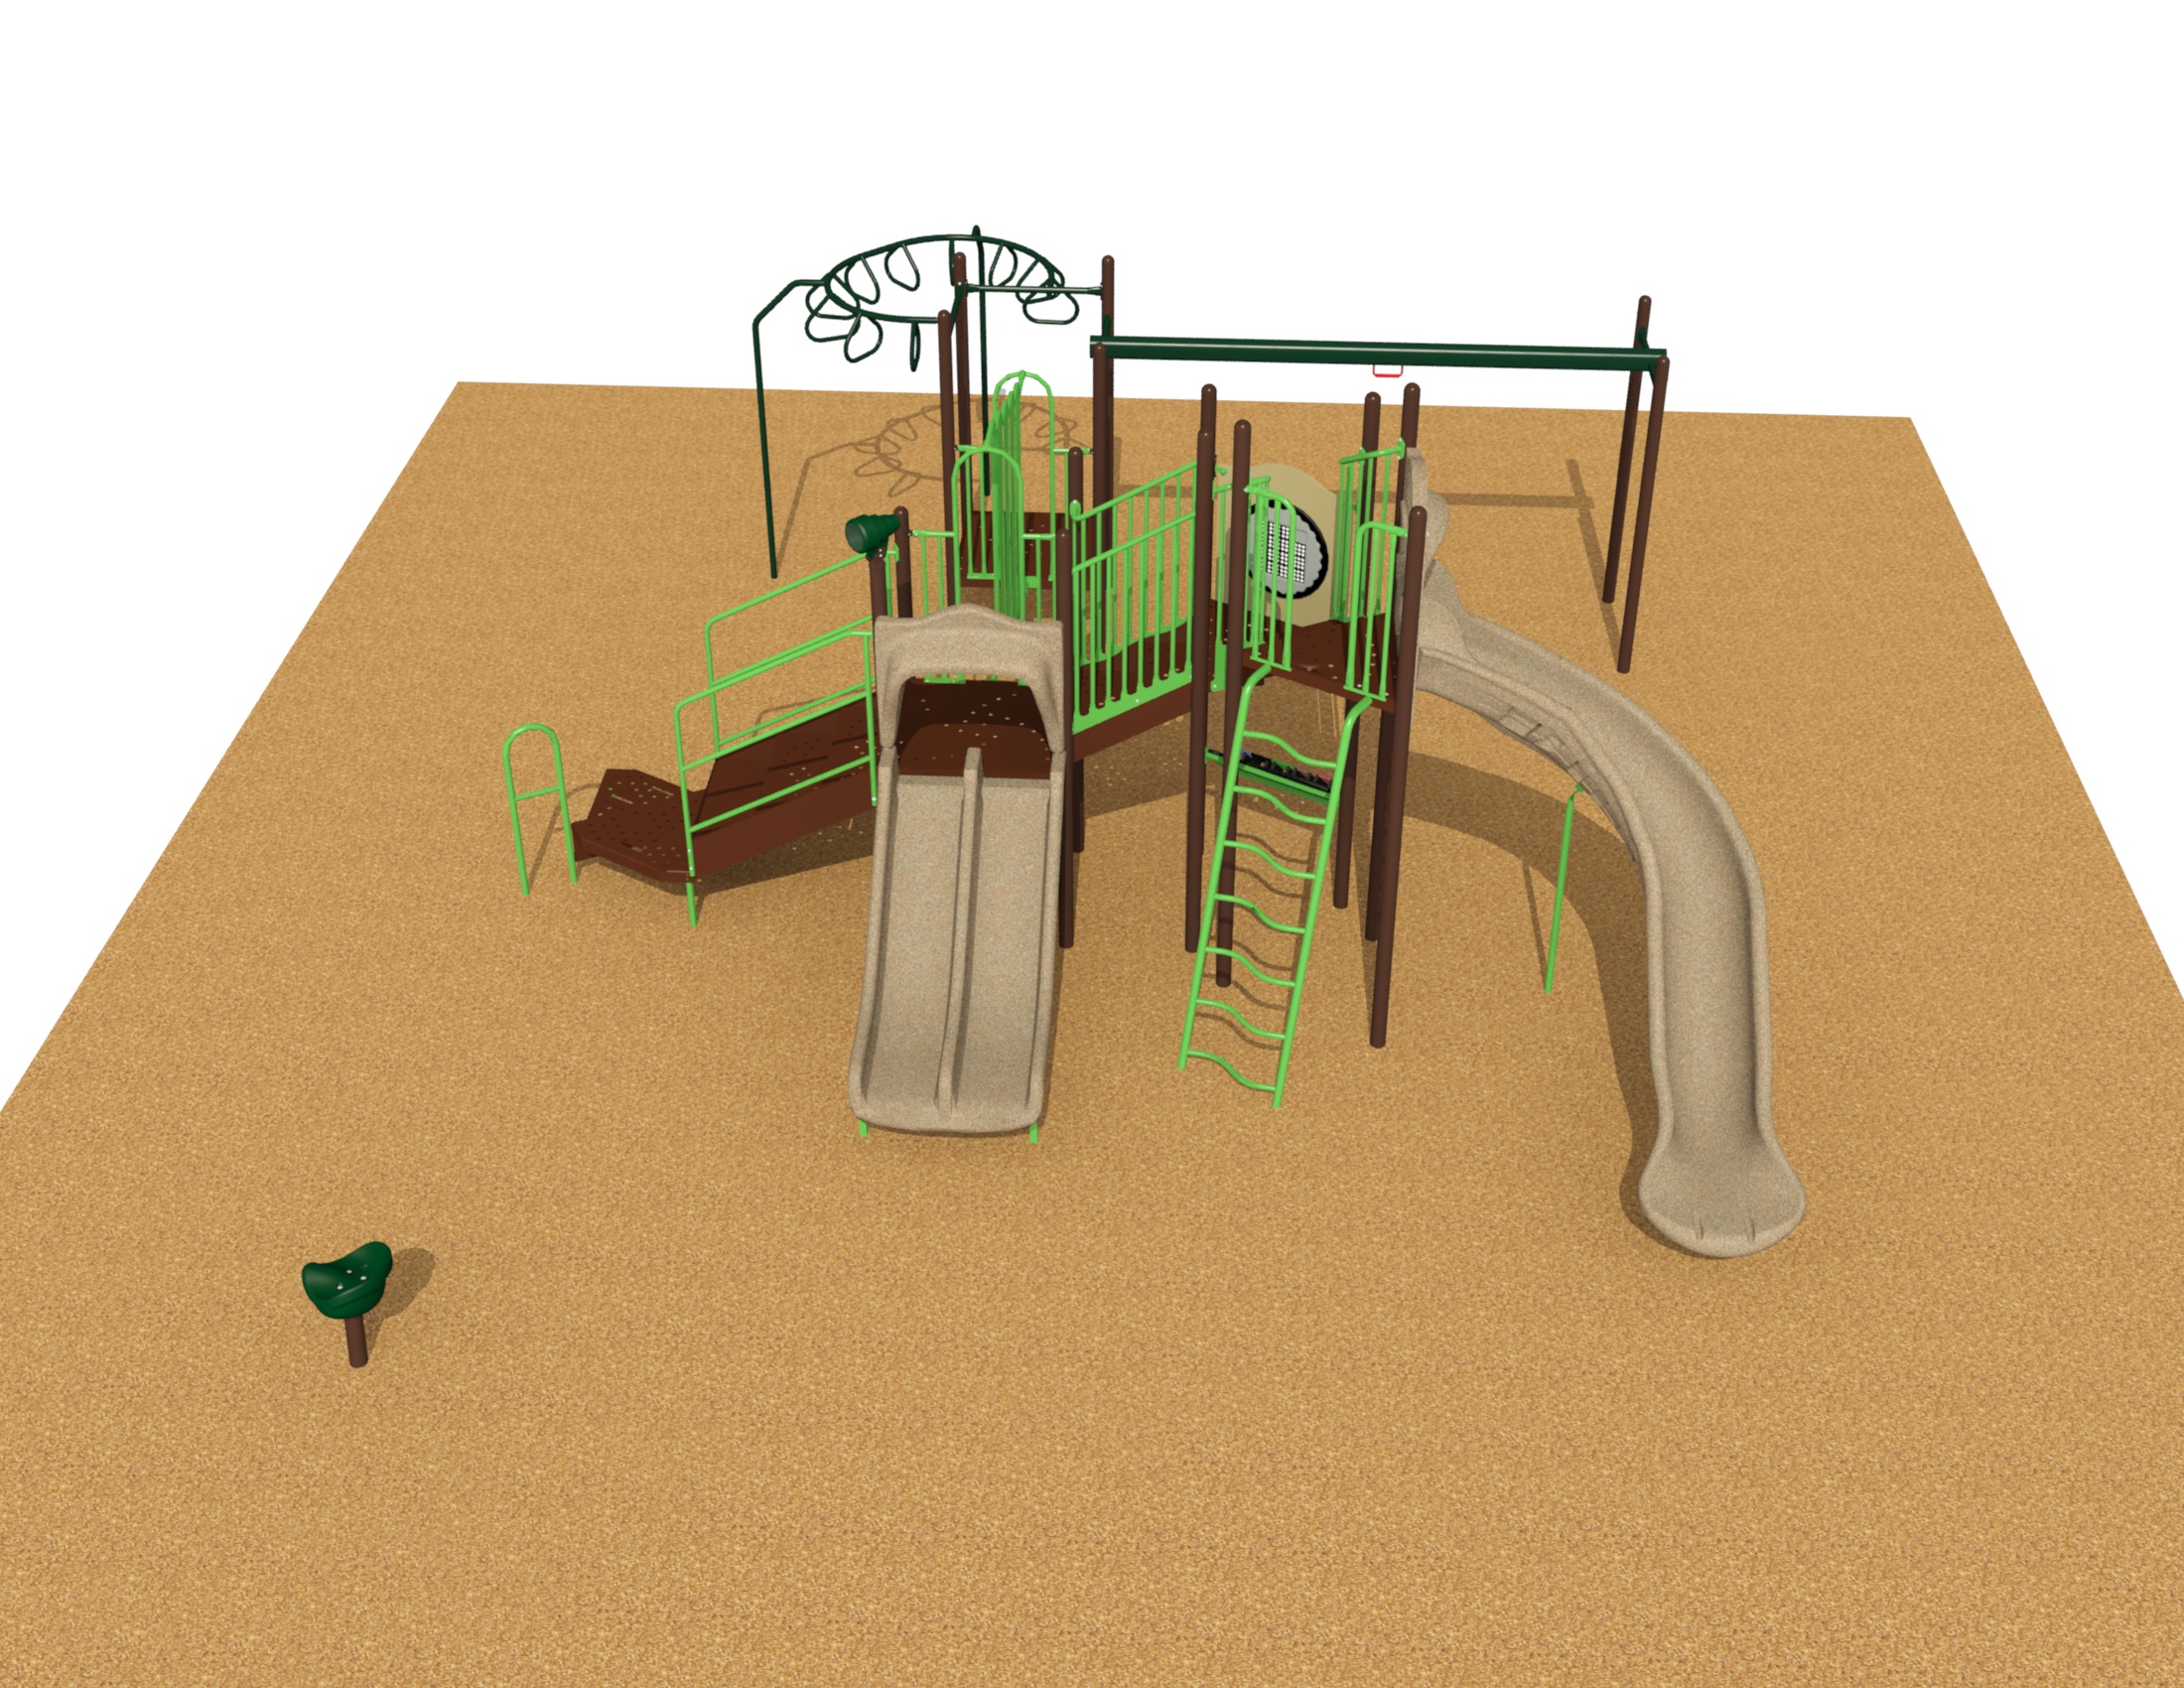 Lloyd Hawn Play Structure Rendering